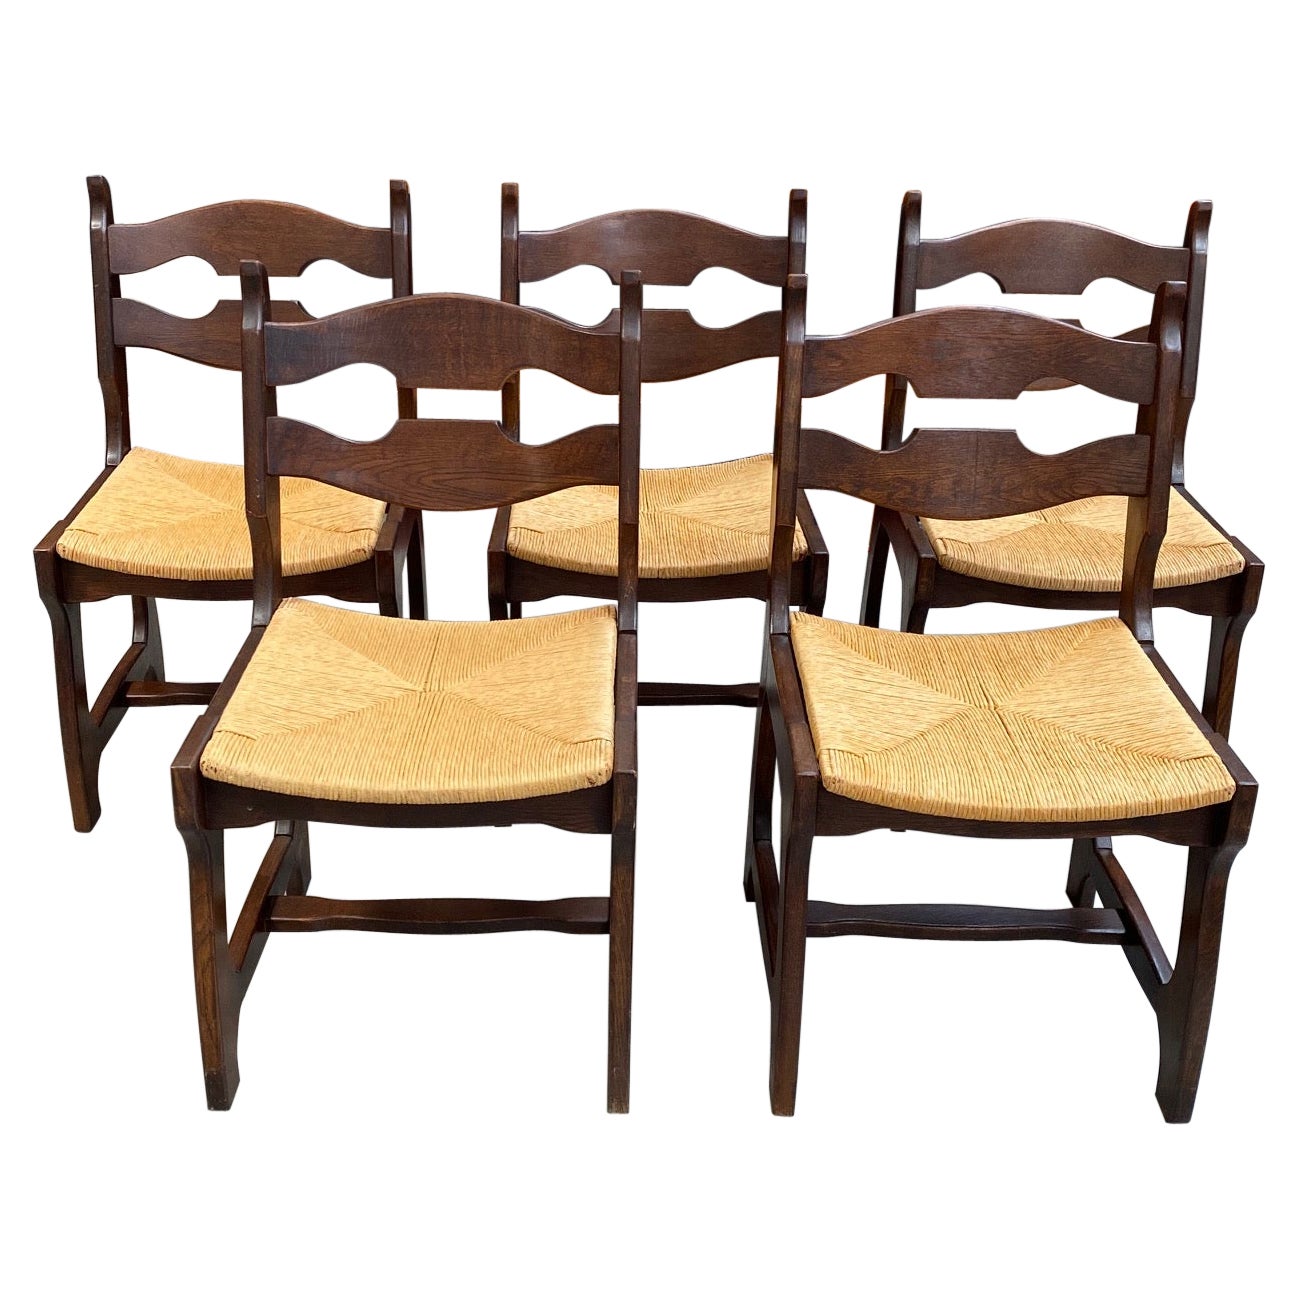 Set of 5 Vintage Oak Chairs For Sale